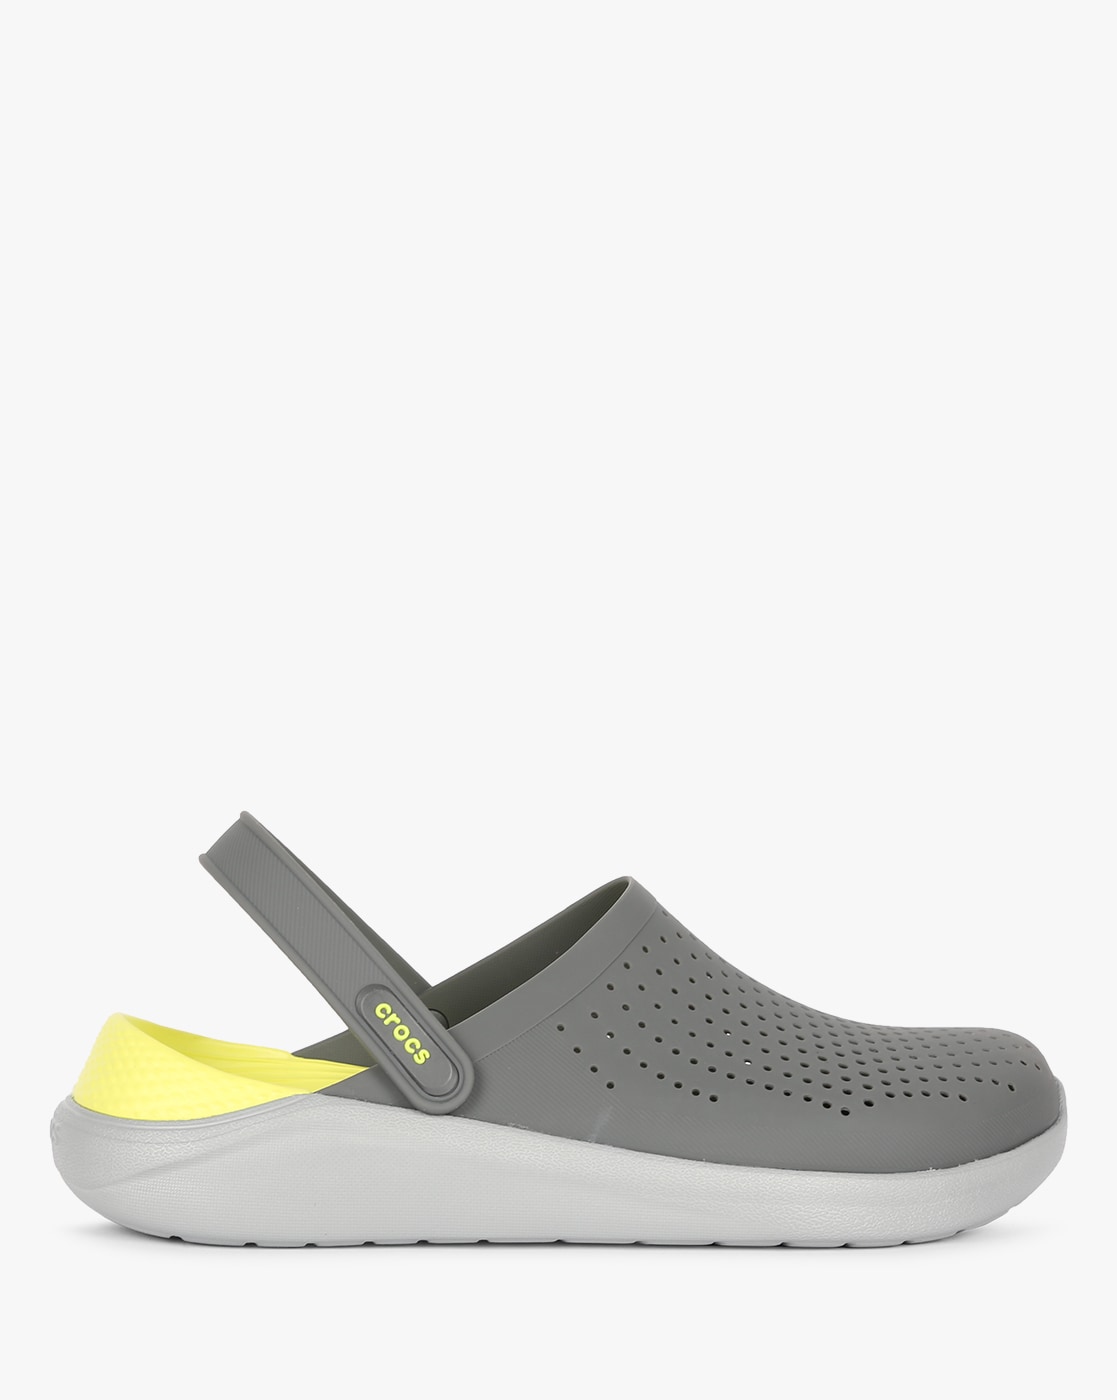 Grey Casual Sandals for Men by CROCS 